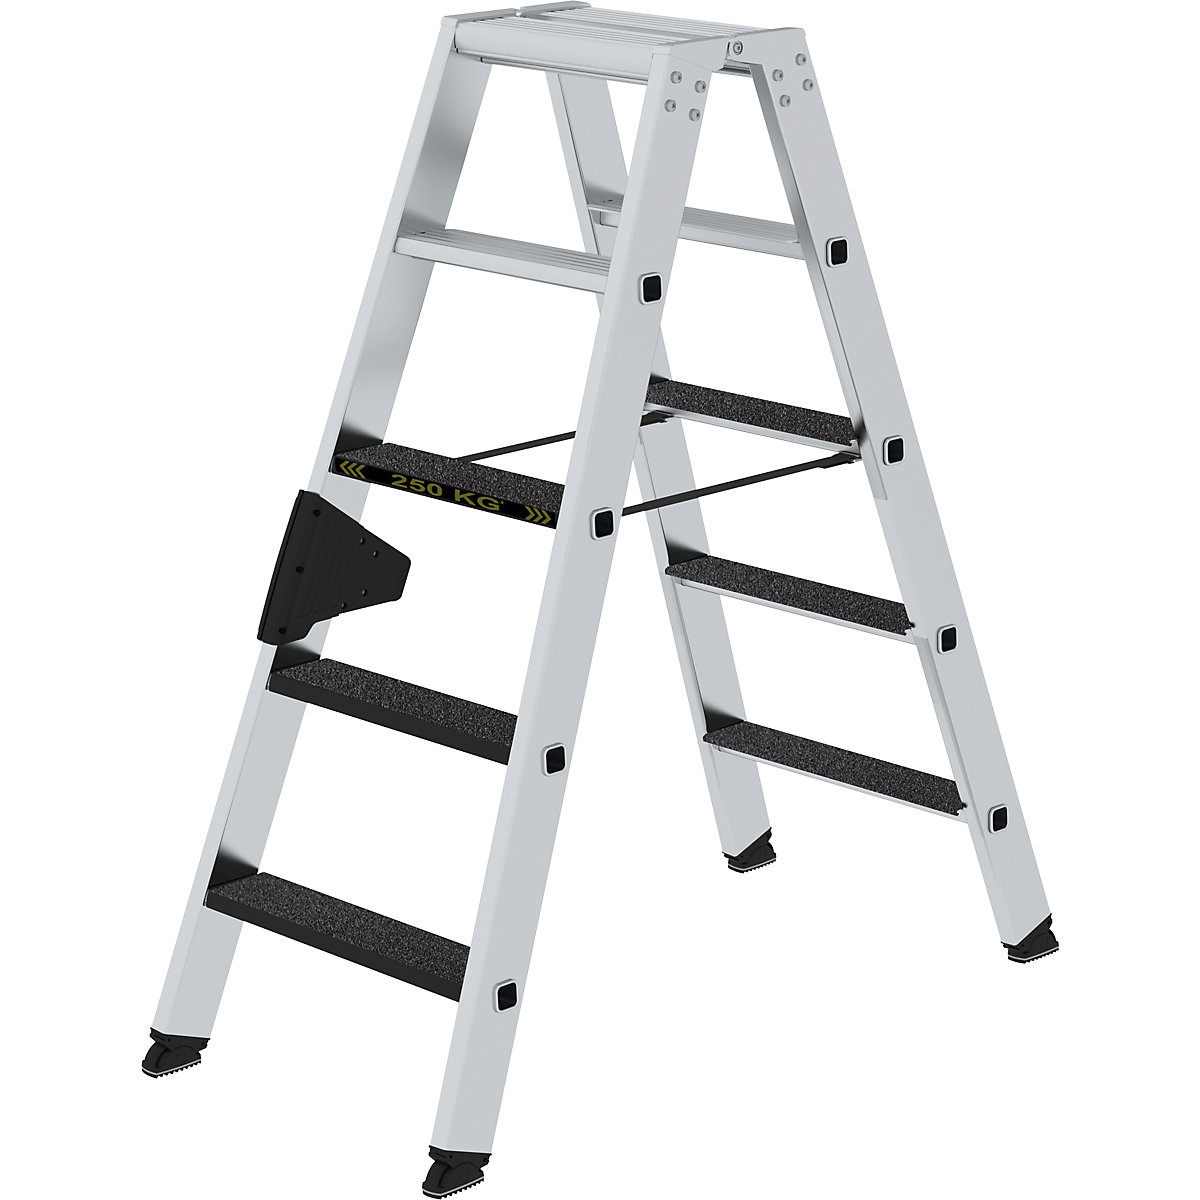 CLIP-STEP step ladder – MUNK, double sided access, slip resistant R13, heavy duty, 2 x 5 steps-9